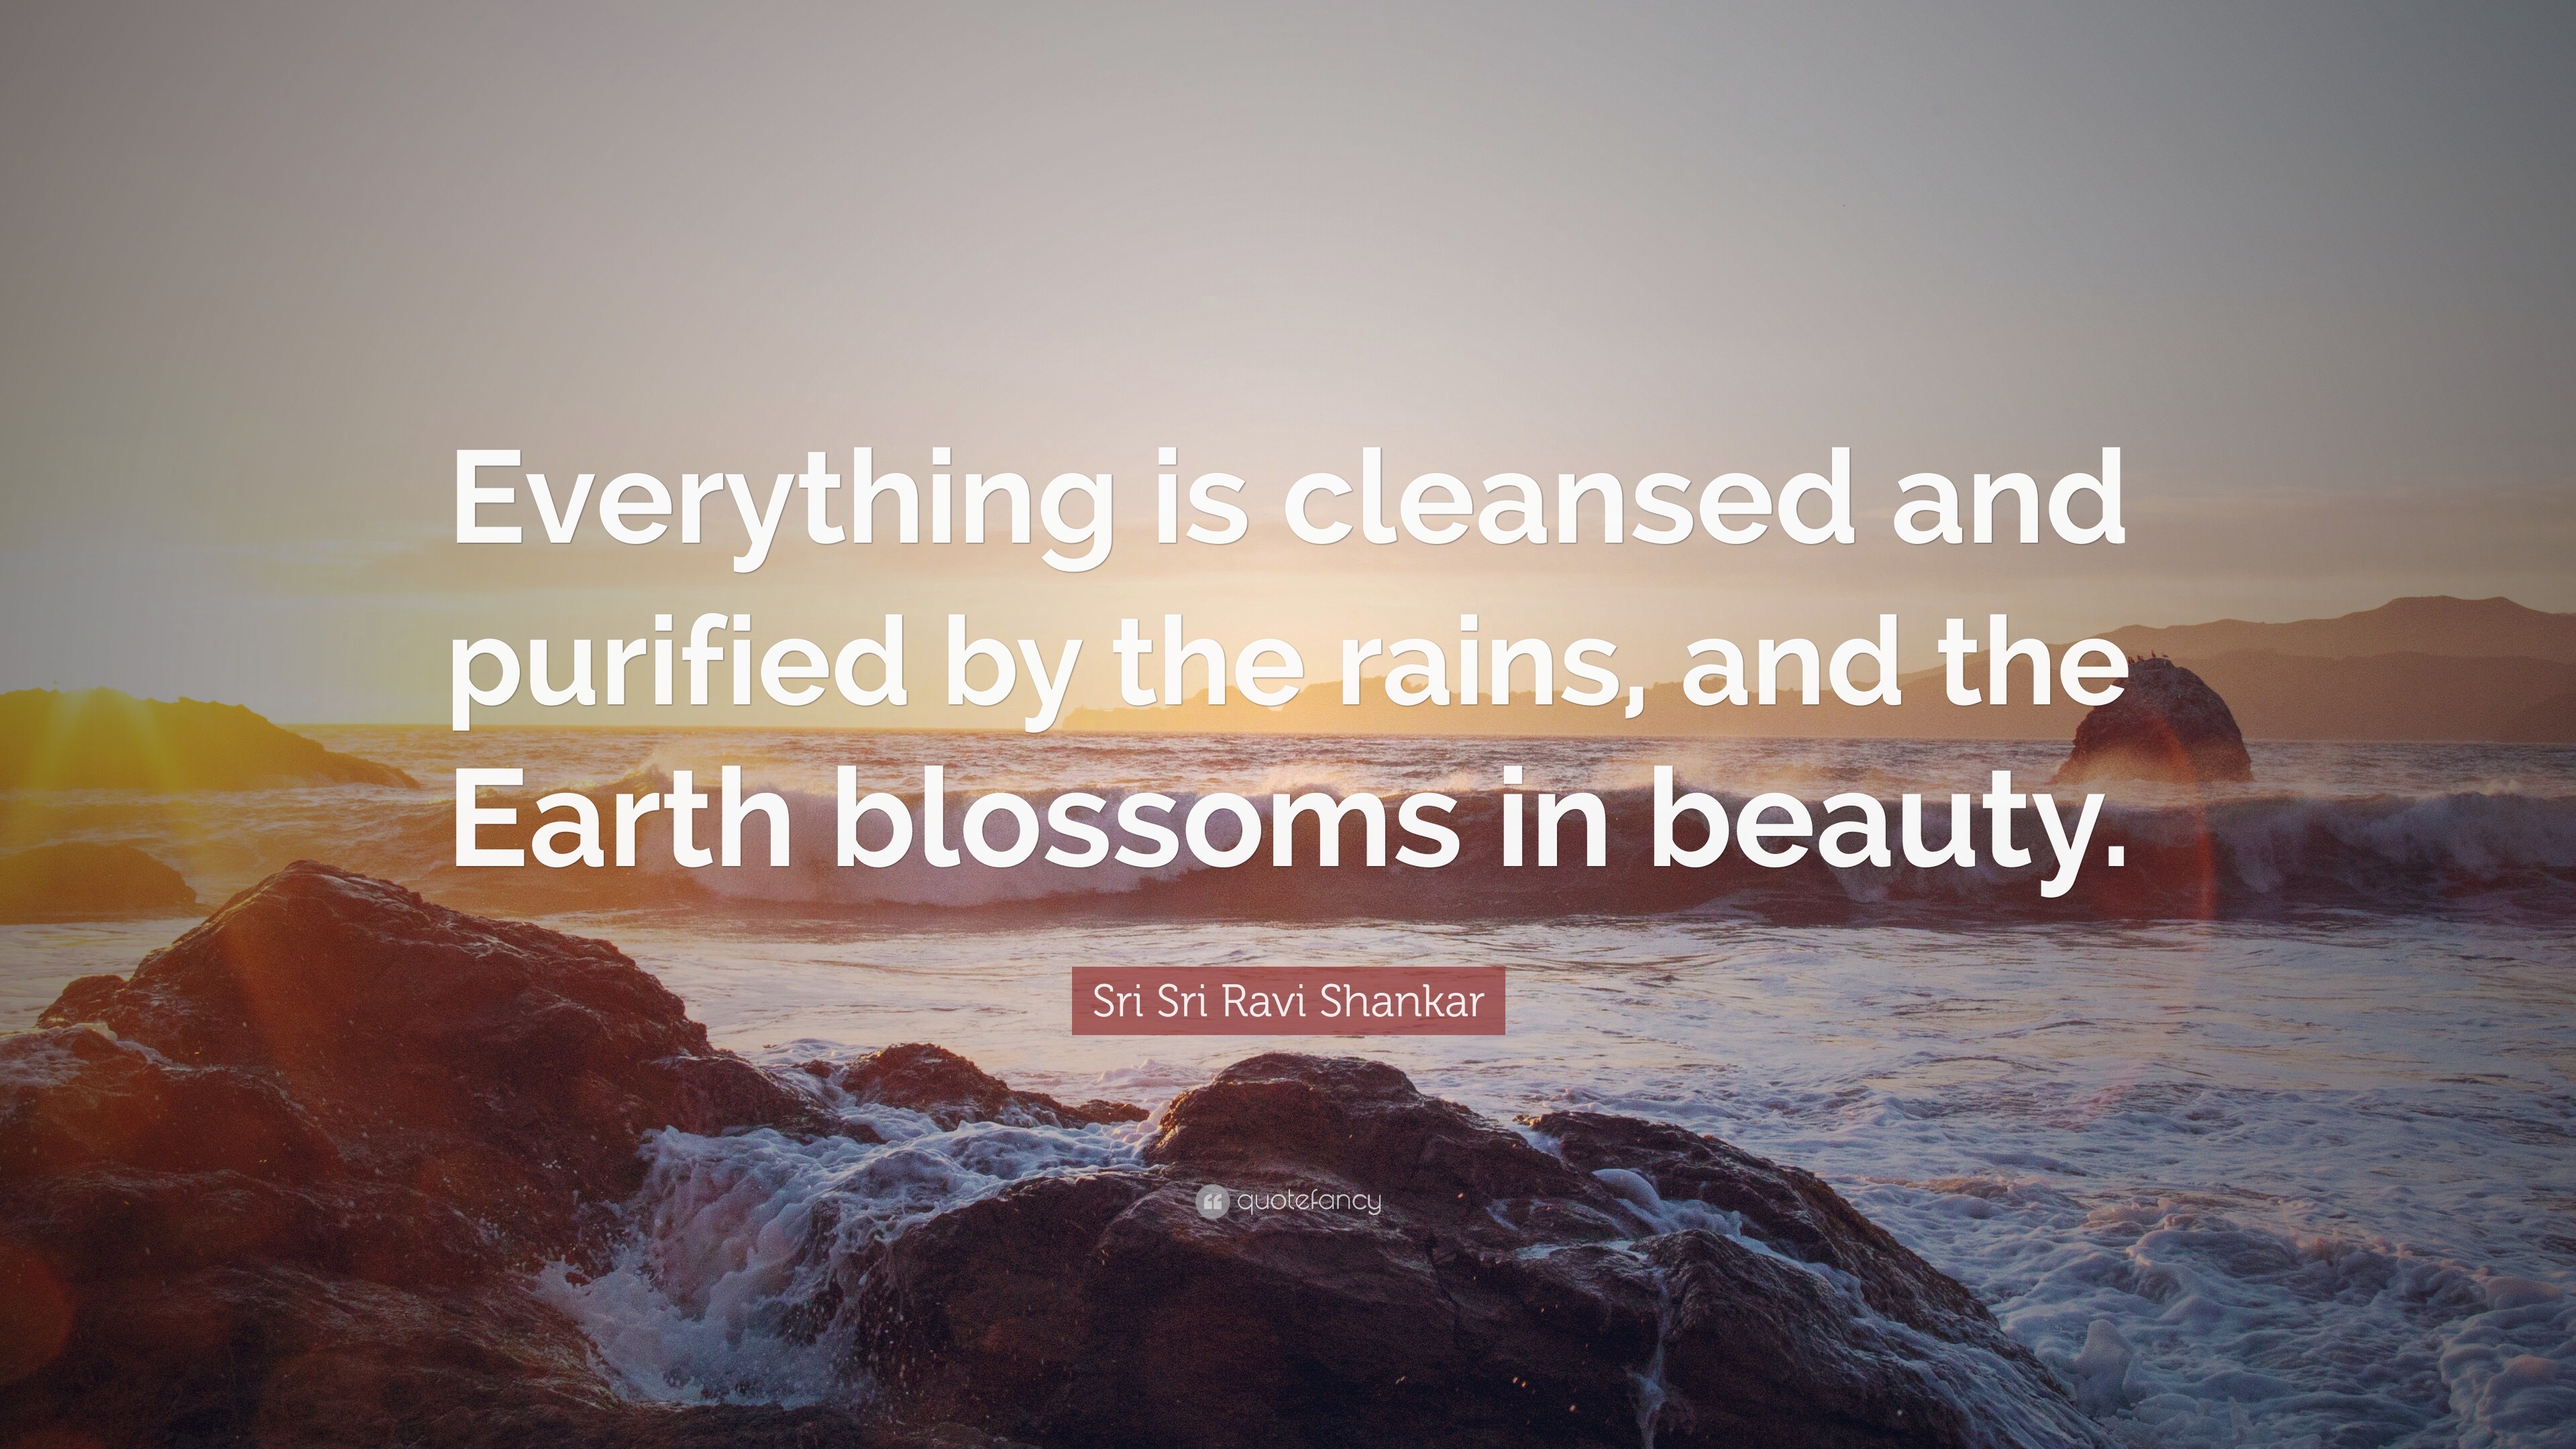 Sri Sri Ravi Shankar Quote: “Everything is cleansed and purified by the  rains, and the Earth